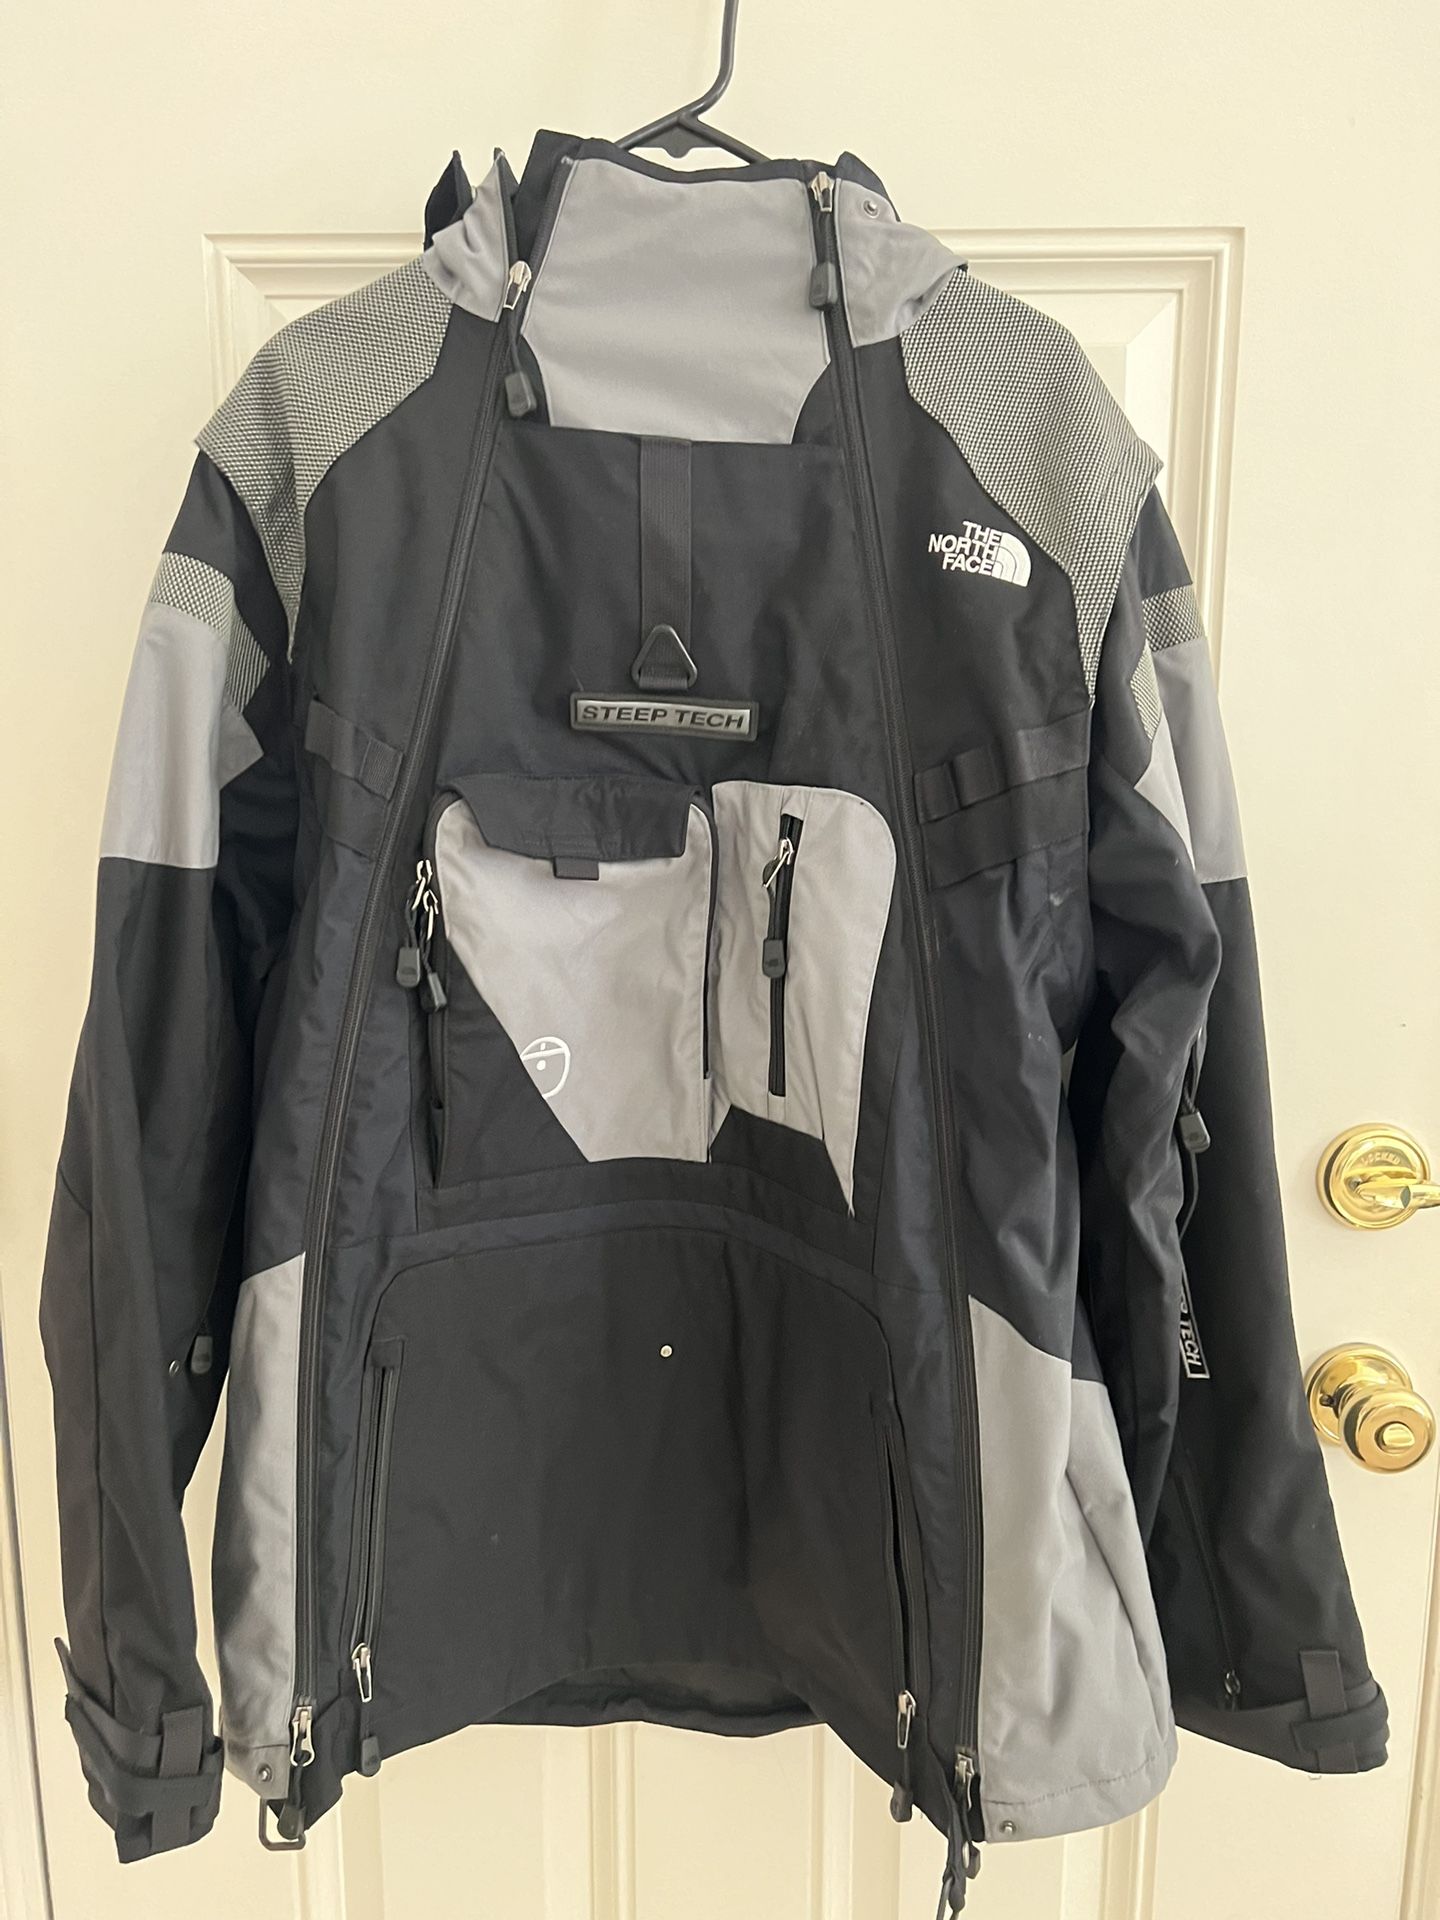 North Face SteepTech XL New Without Tags